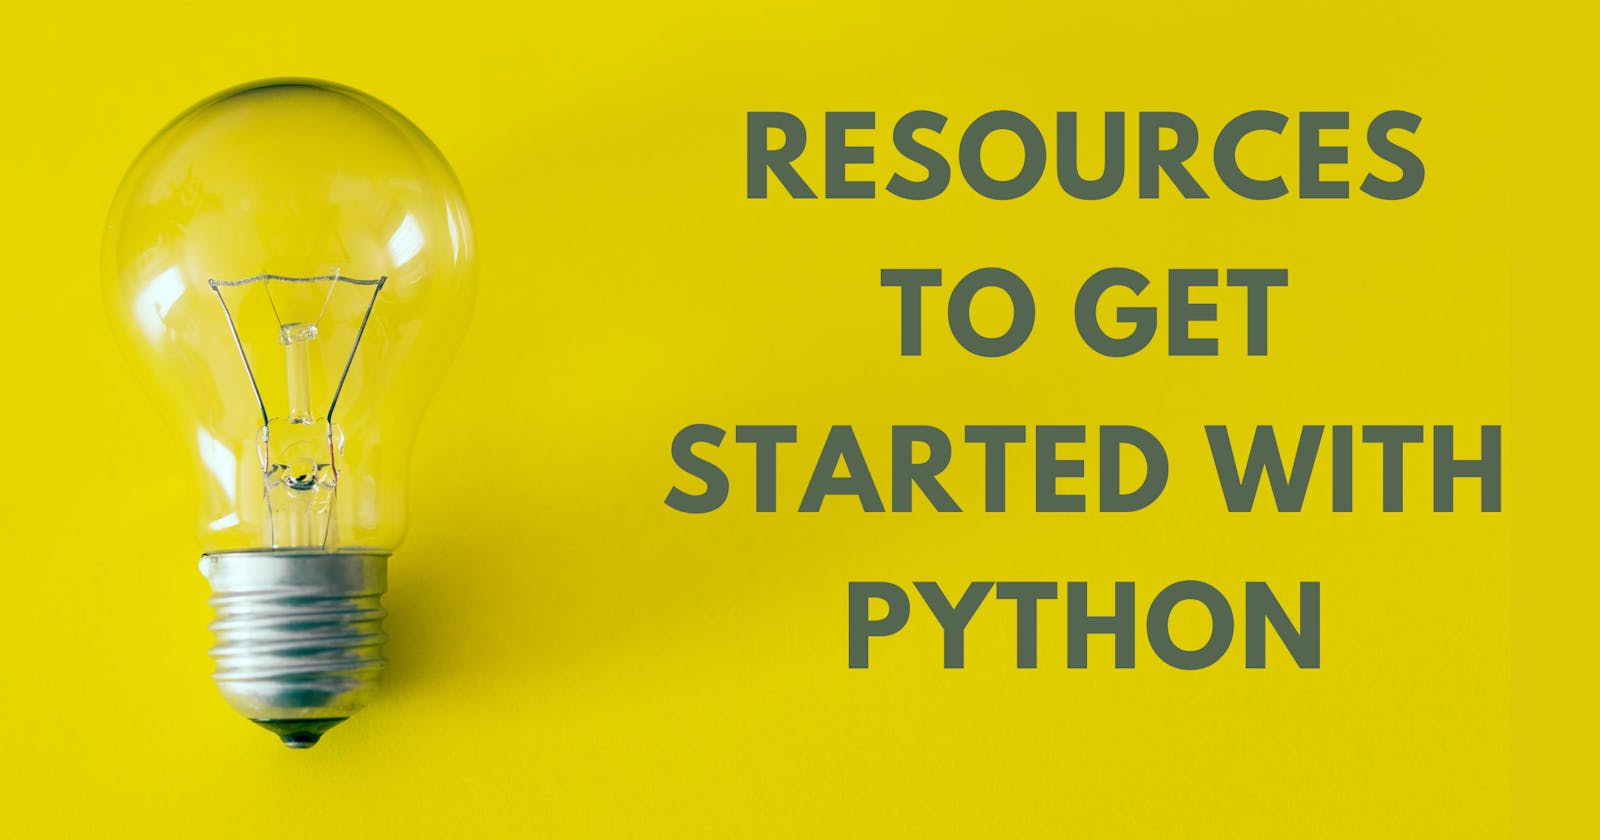 Resources to get started with Python